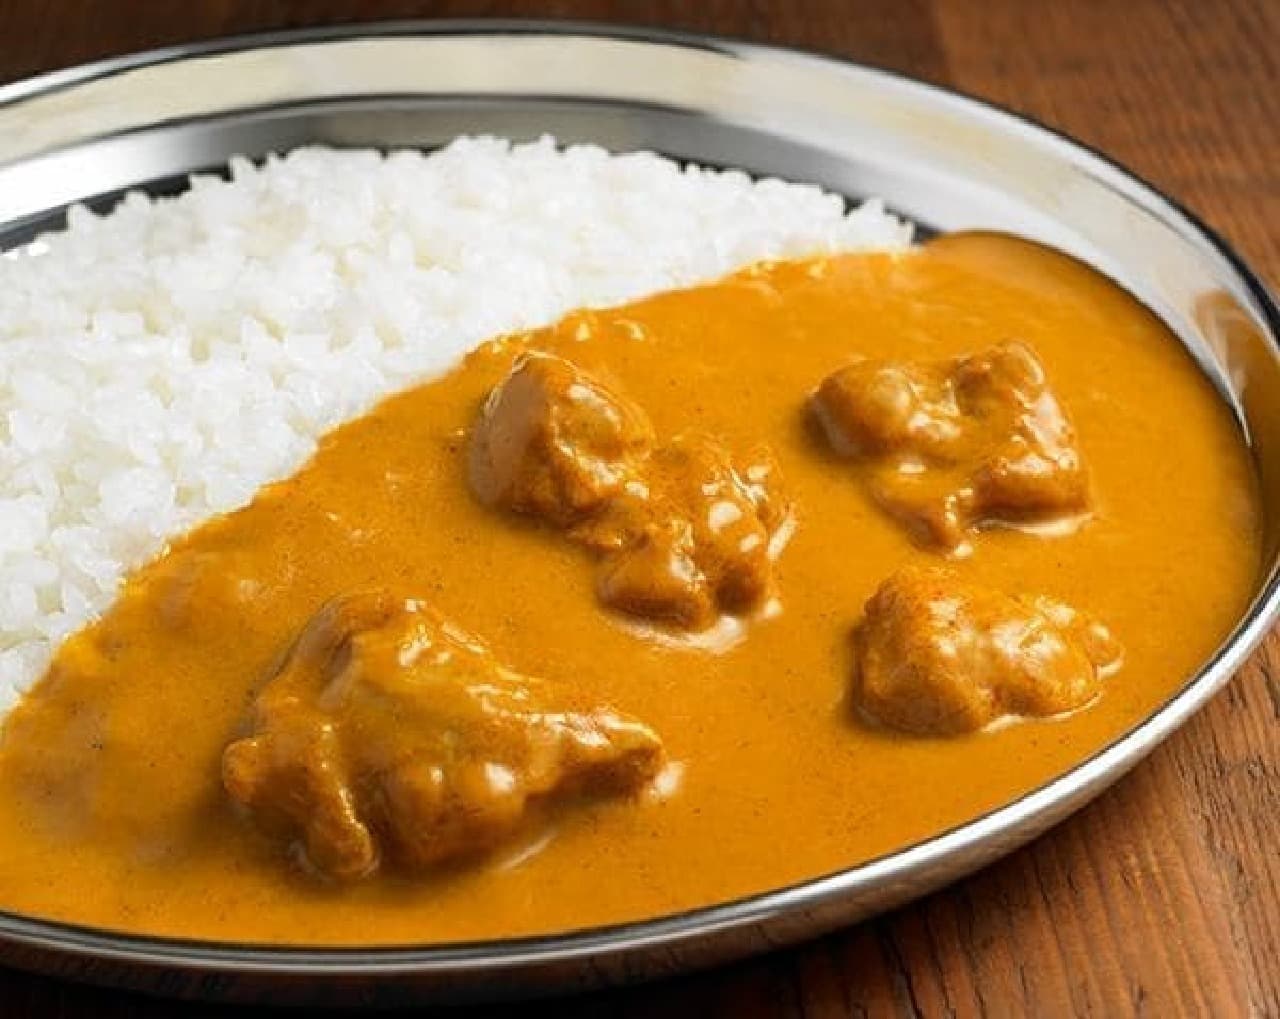 MUJI "Curry creamy butter chicken made from the ingredients"